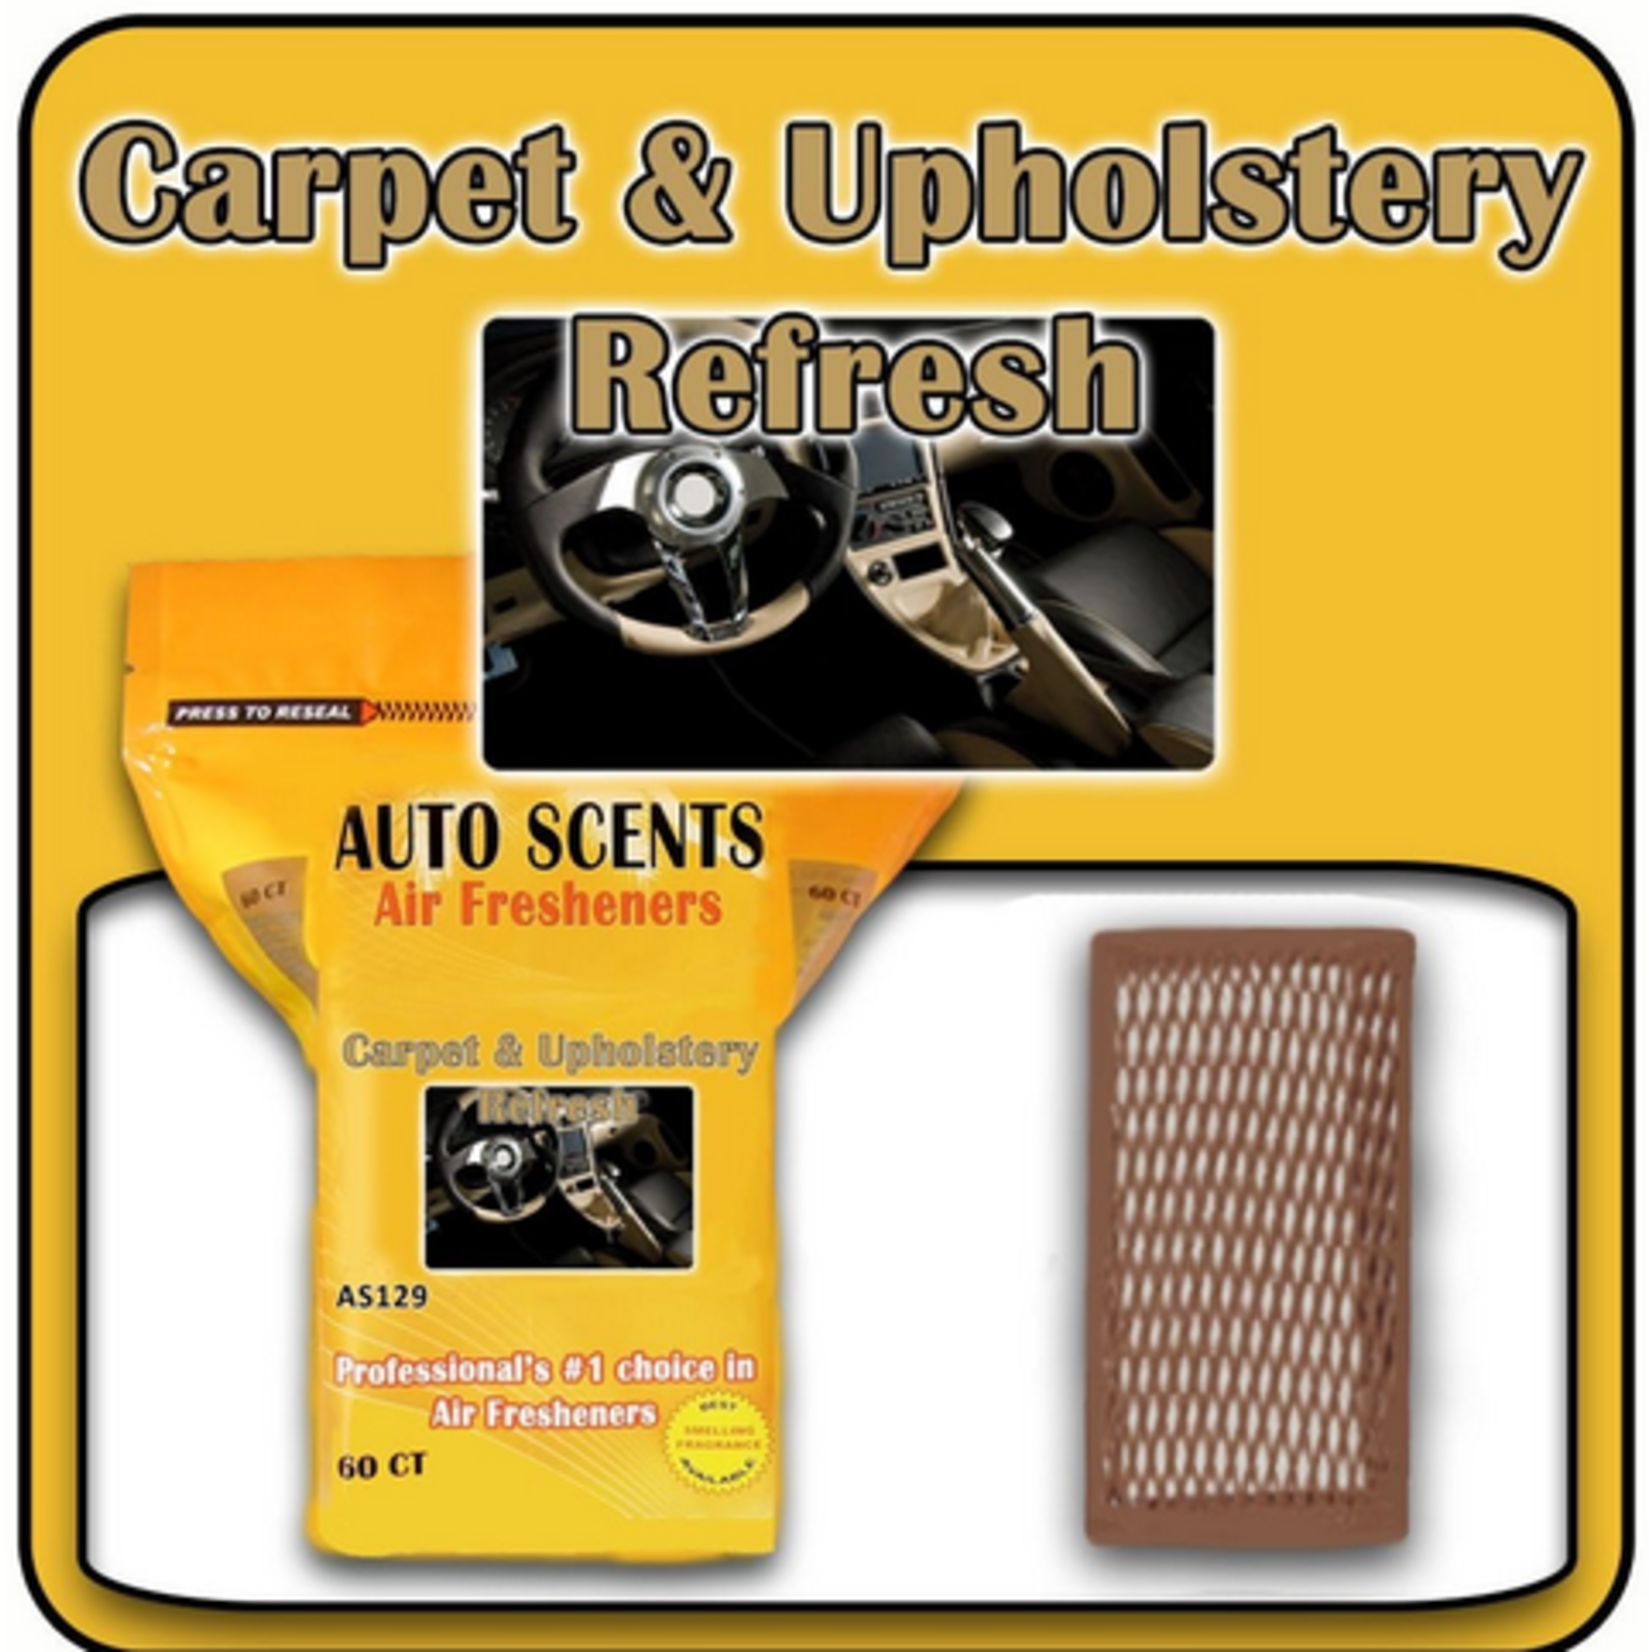 Auto Scents Auto Scents Air Fresheners - 60pck Singles Carpet & Upholstery Renew